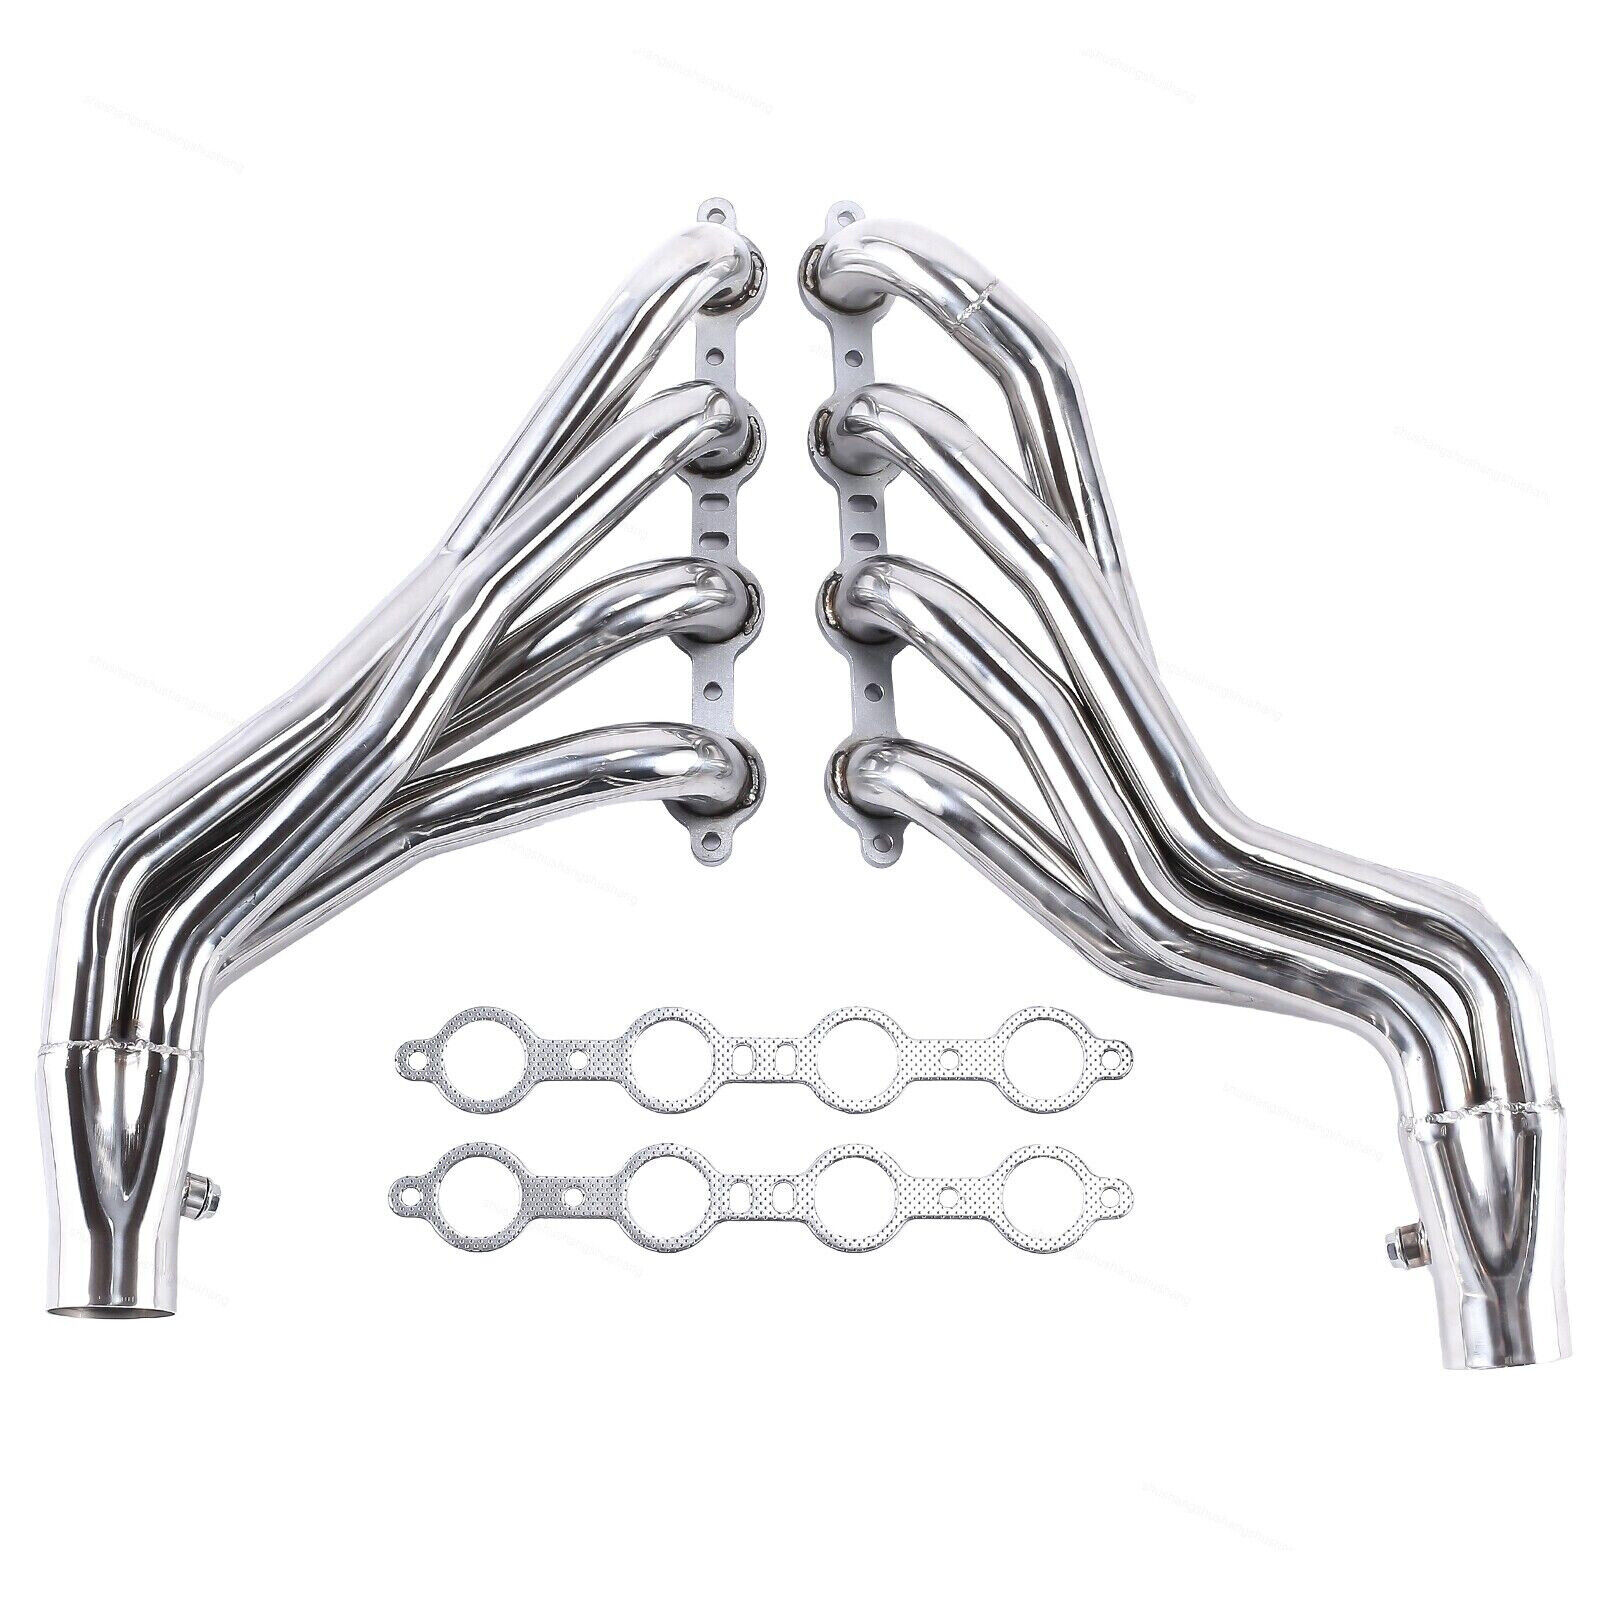 For Camaro Firebird 82-92 5.0L 5.7L  Manifold Long Tube Headers Stainless Steel